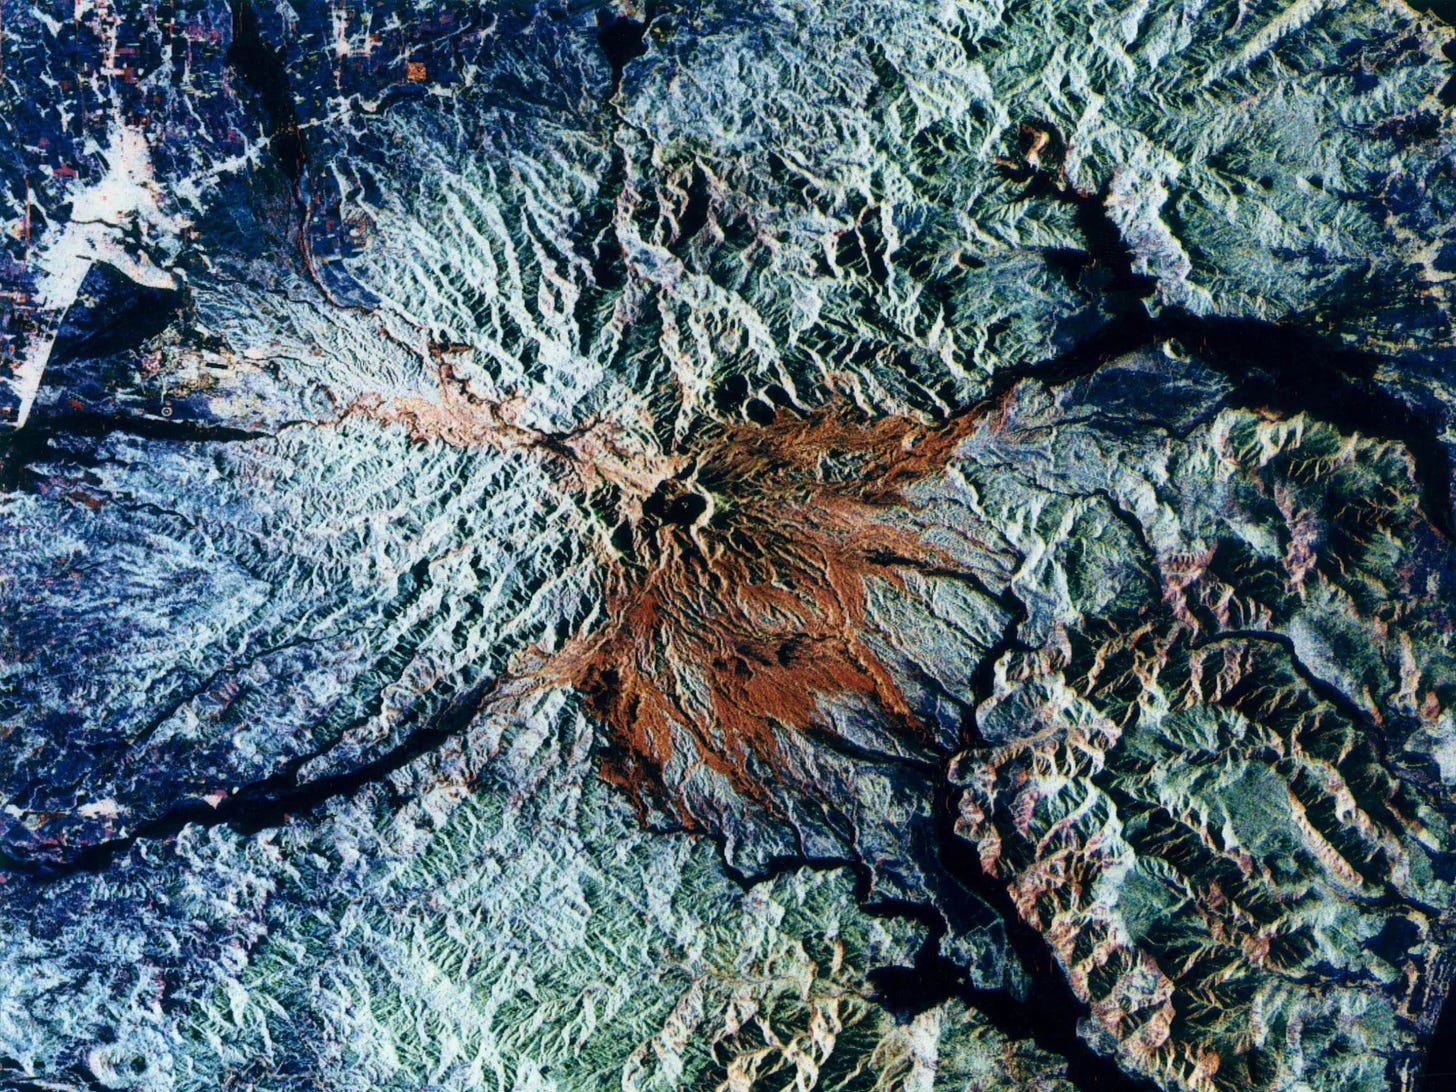 An aerial image of a volcano crater using Synthetic Aperture Radar, where the crater appears red and the surrounding moutains appear blue and green